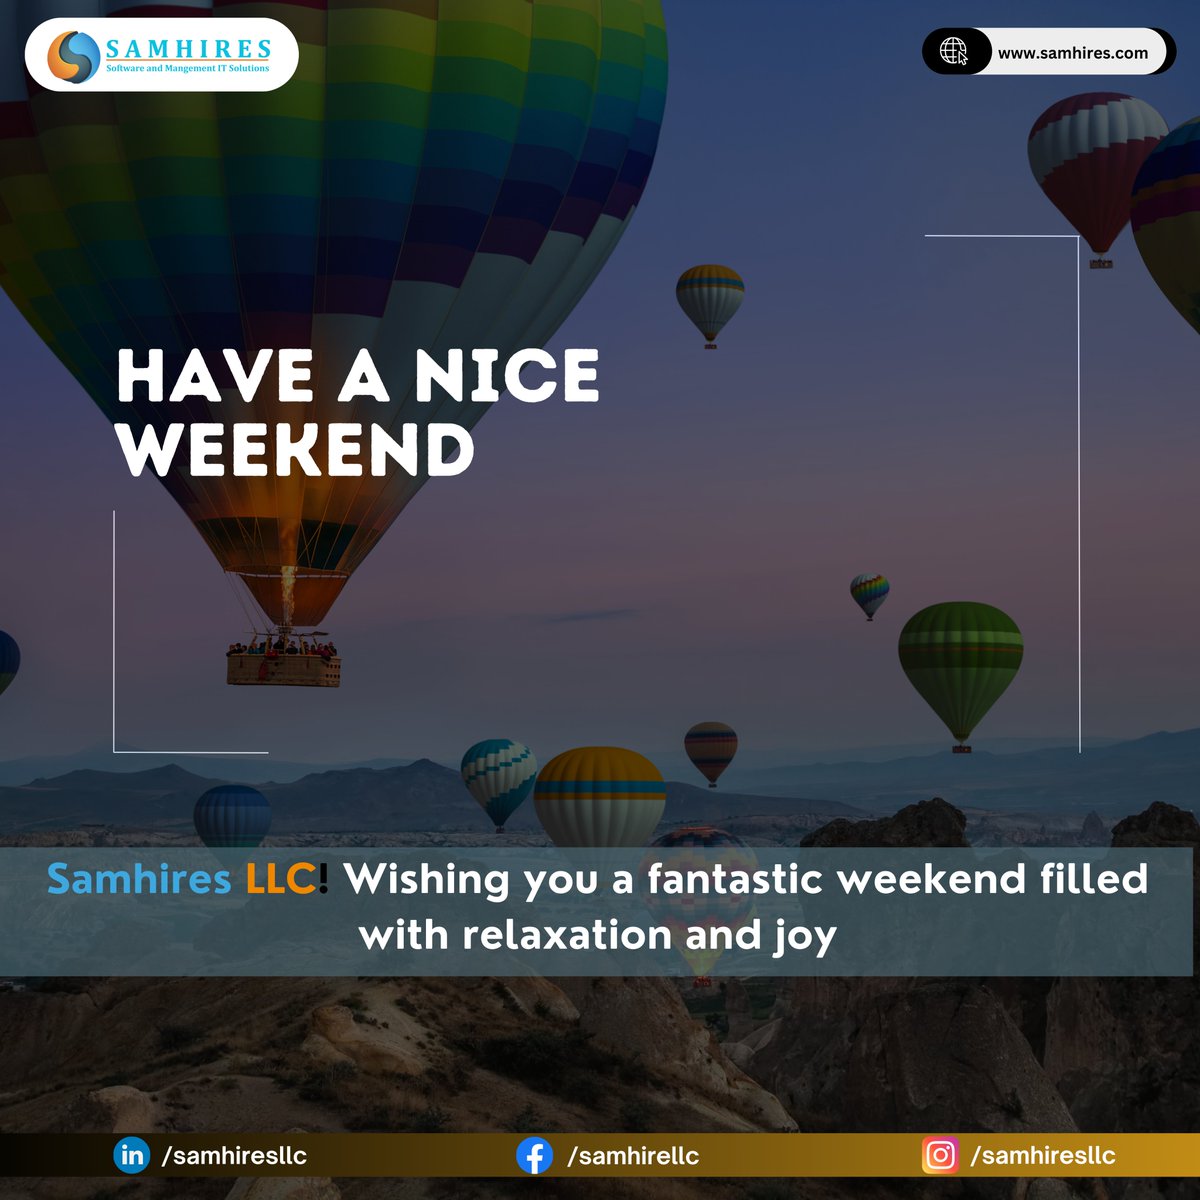 Happy 𝐰𝐞𝐞𝐤𝐞𝐧𝐝 from Samhires LLC! Wishing you a relaxing and enjoyable time ahead. 
#WeekendVibes #SamhiresLLC #Relaxation